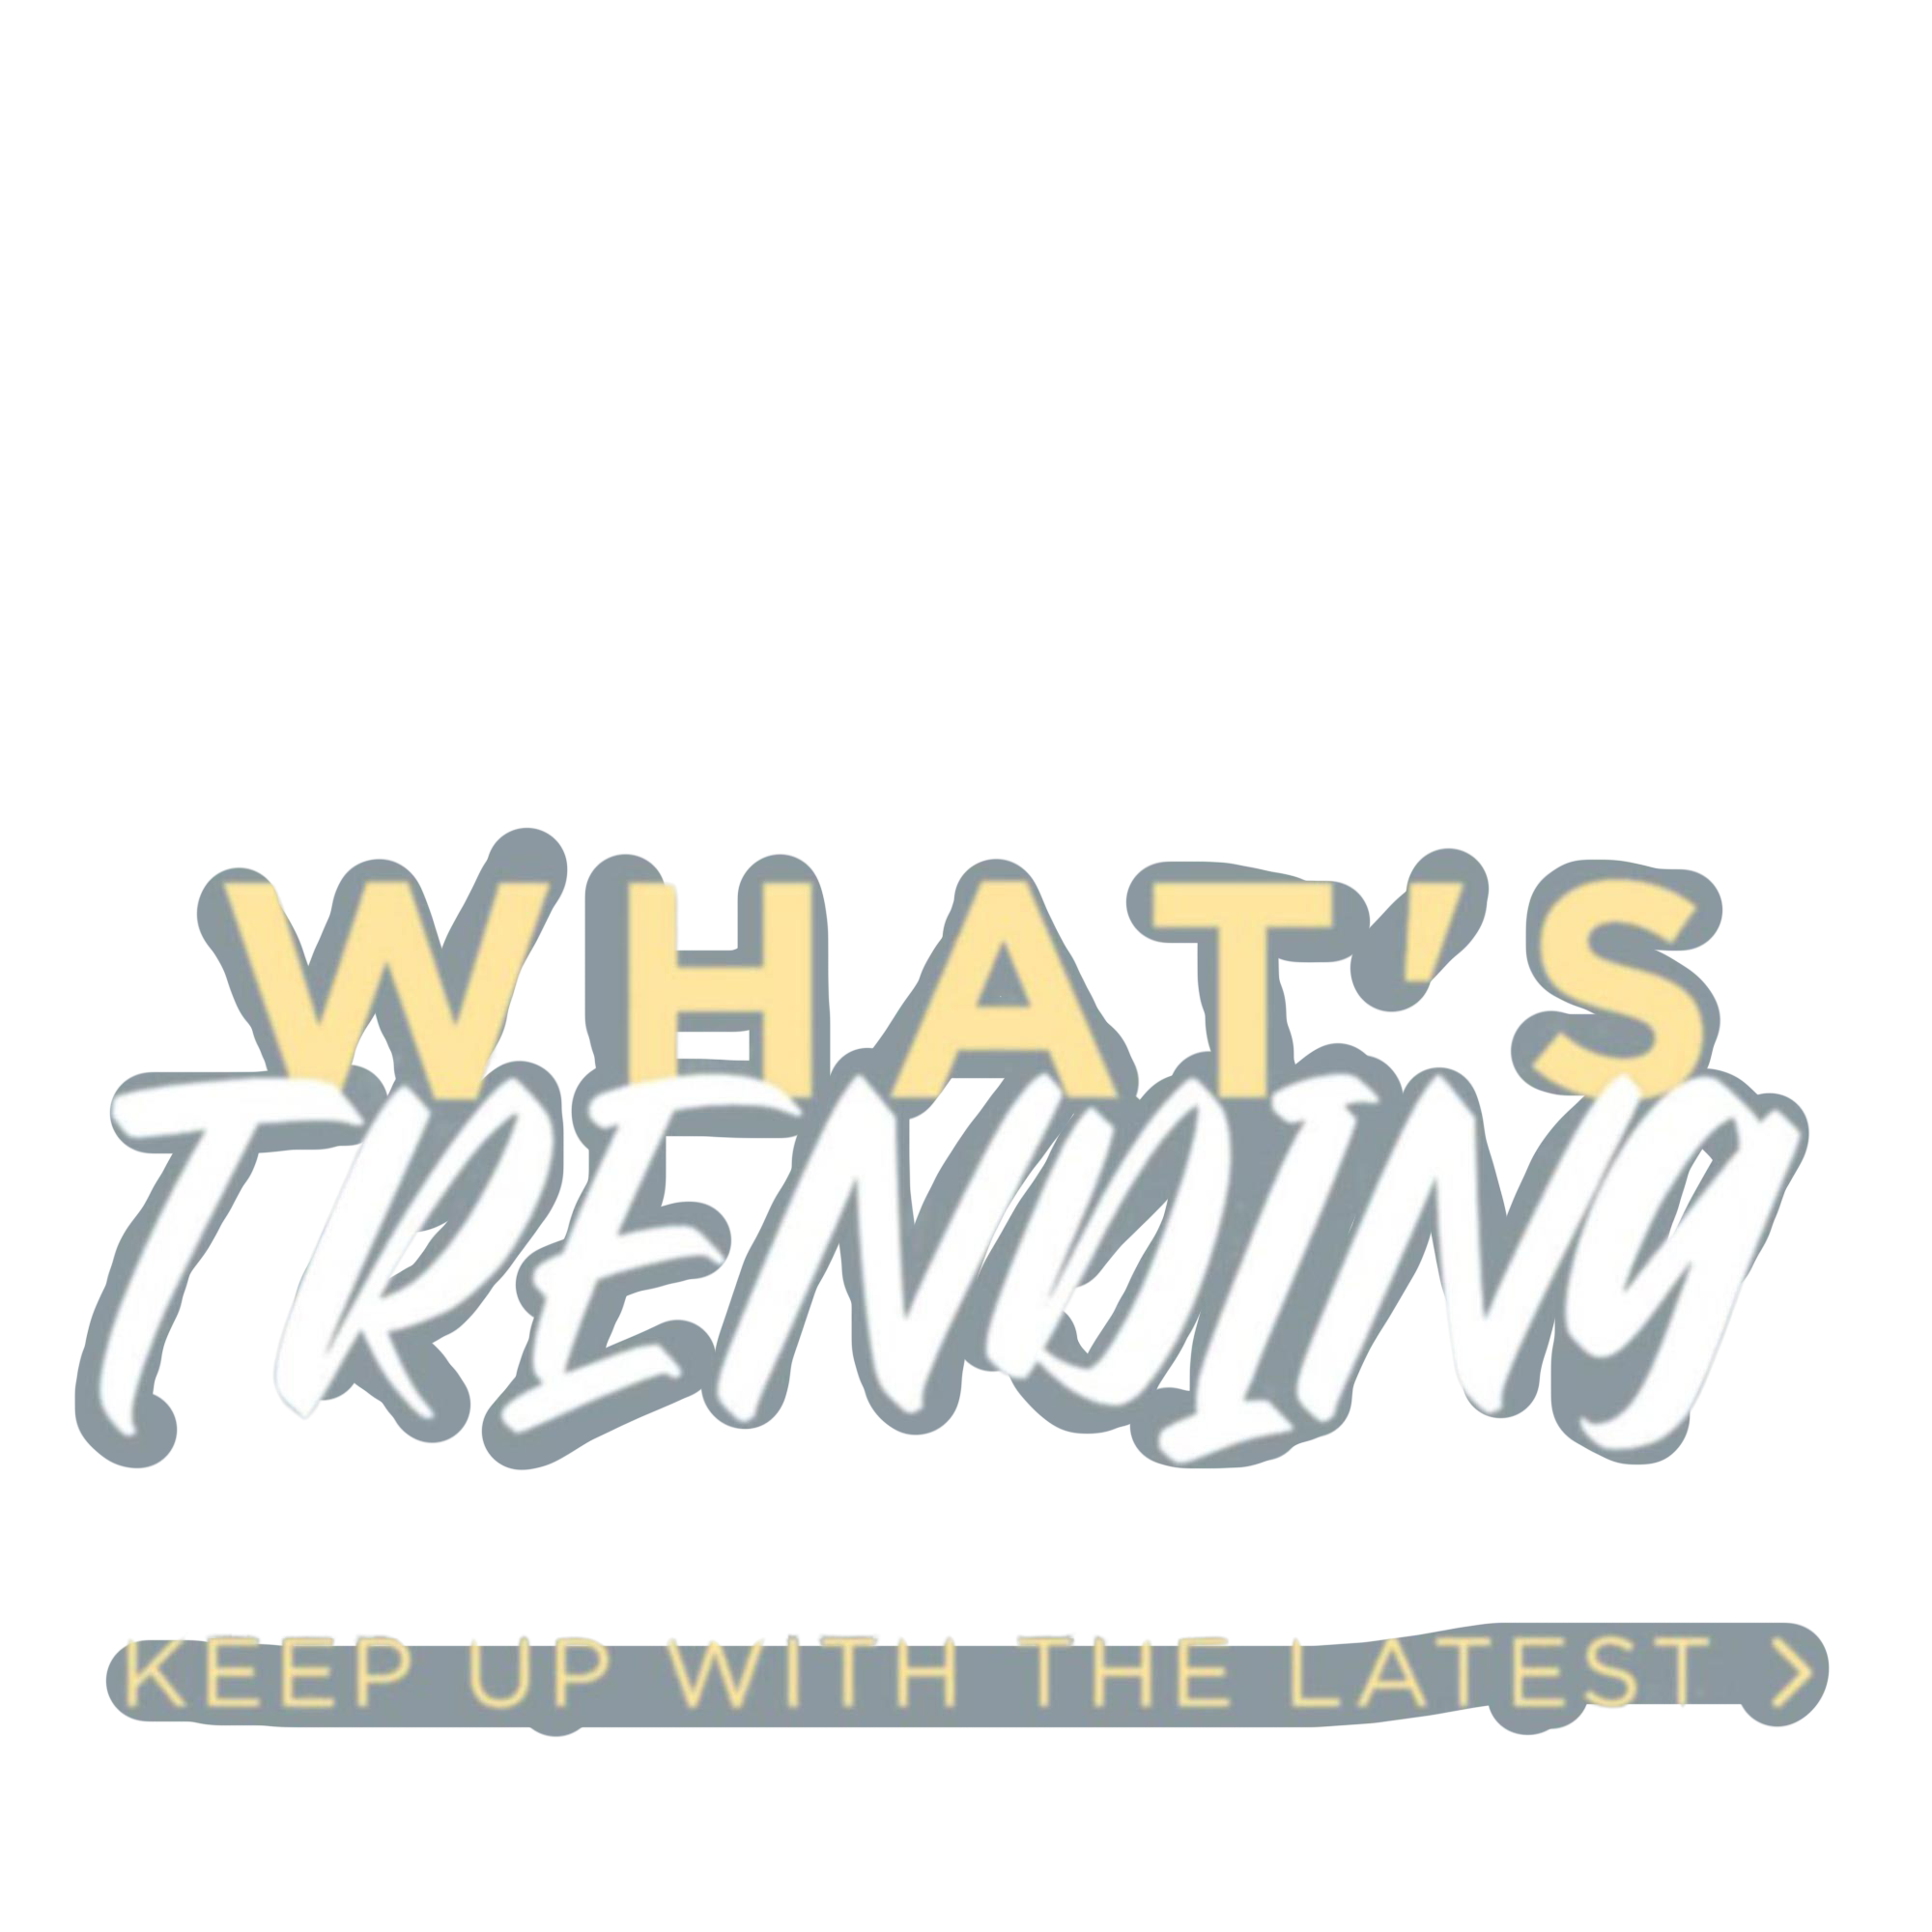 Trending-ClearPNG3.png